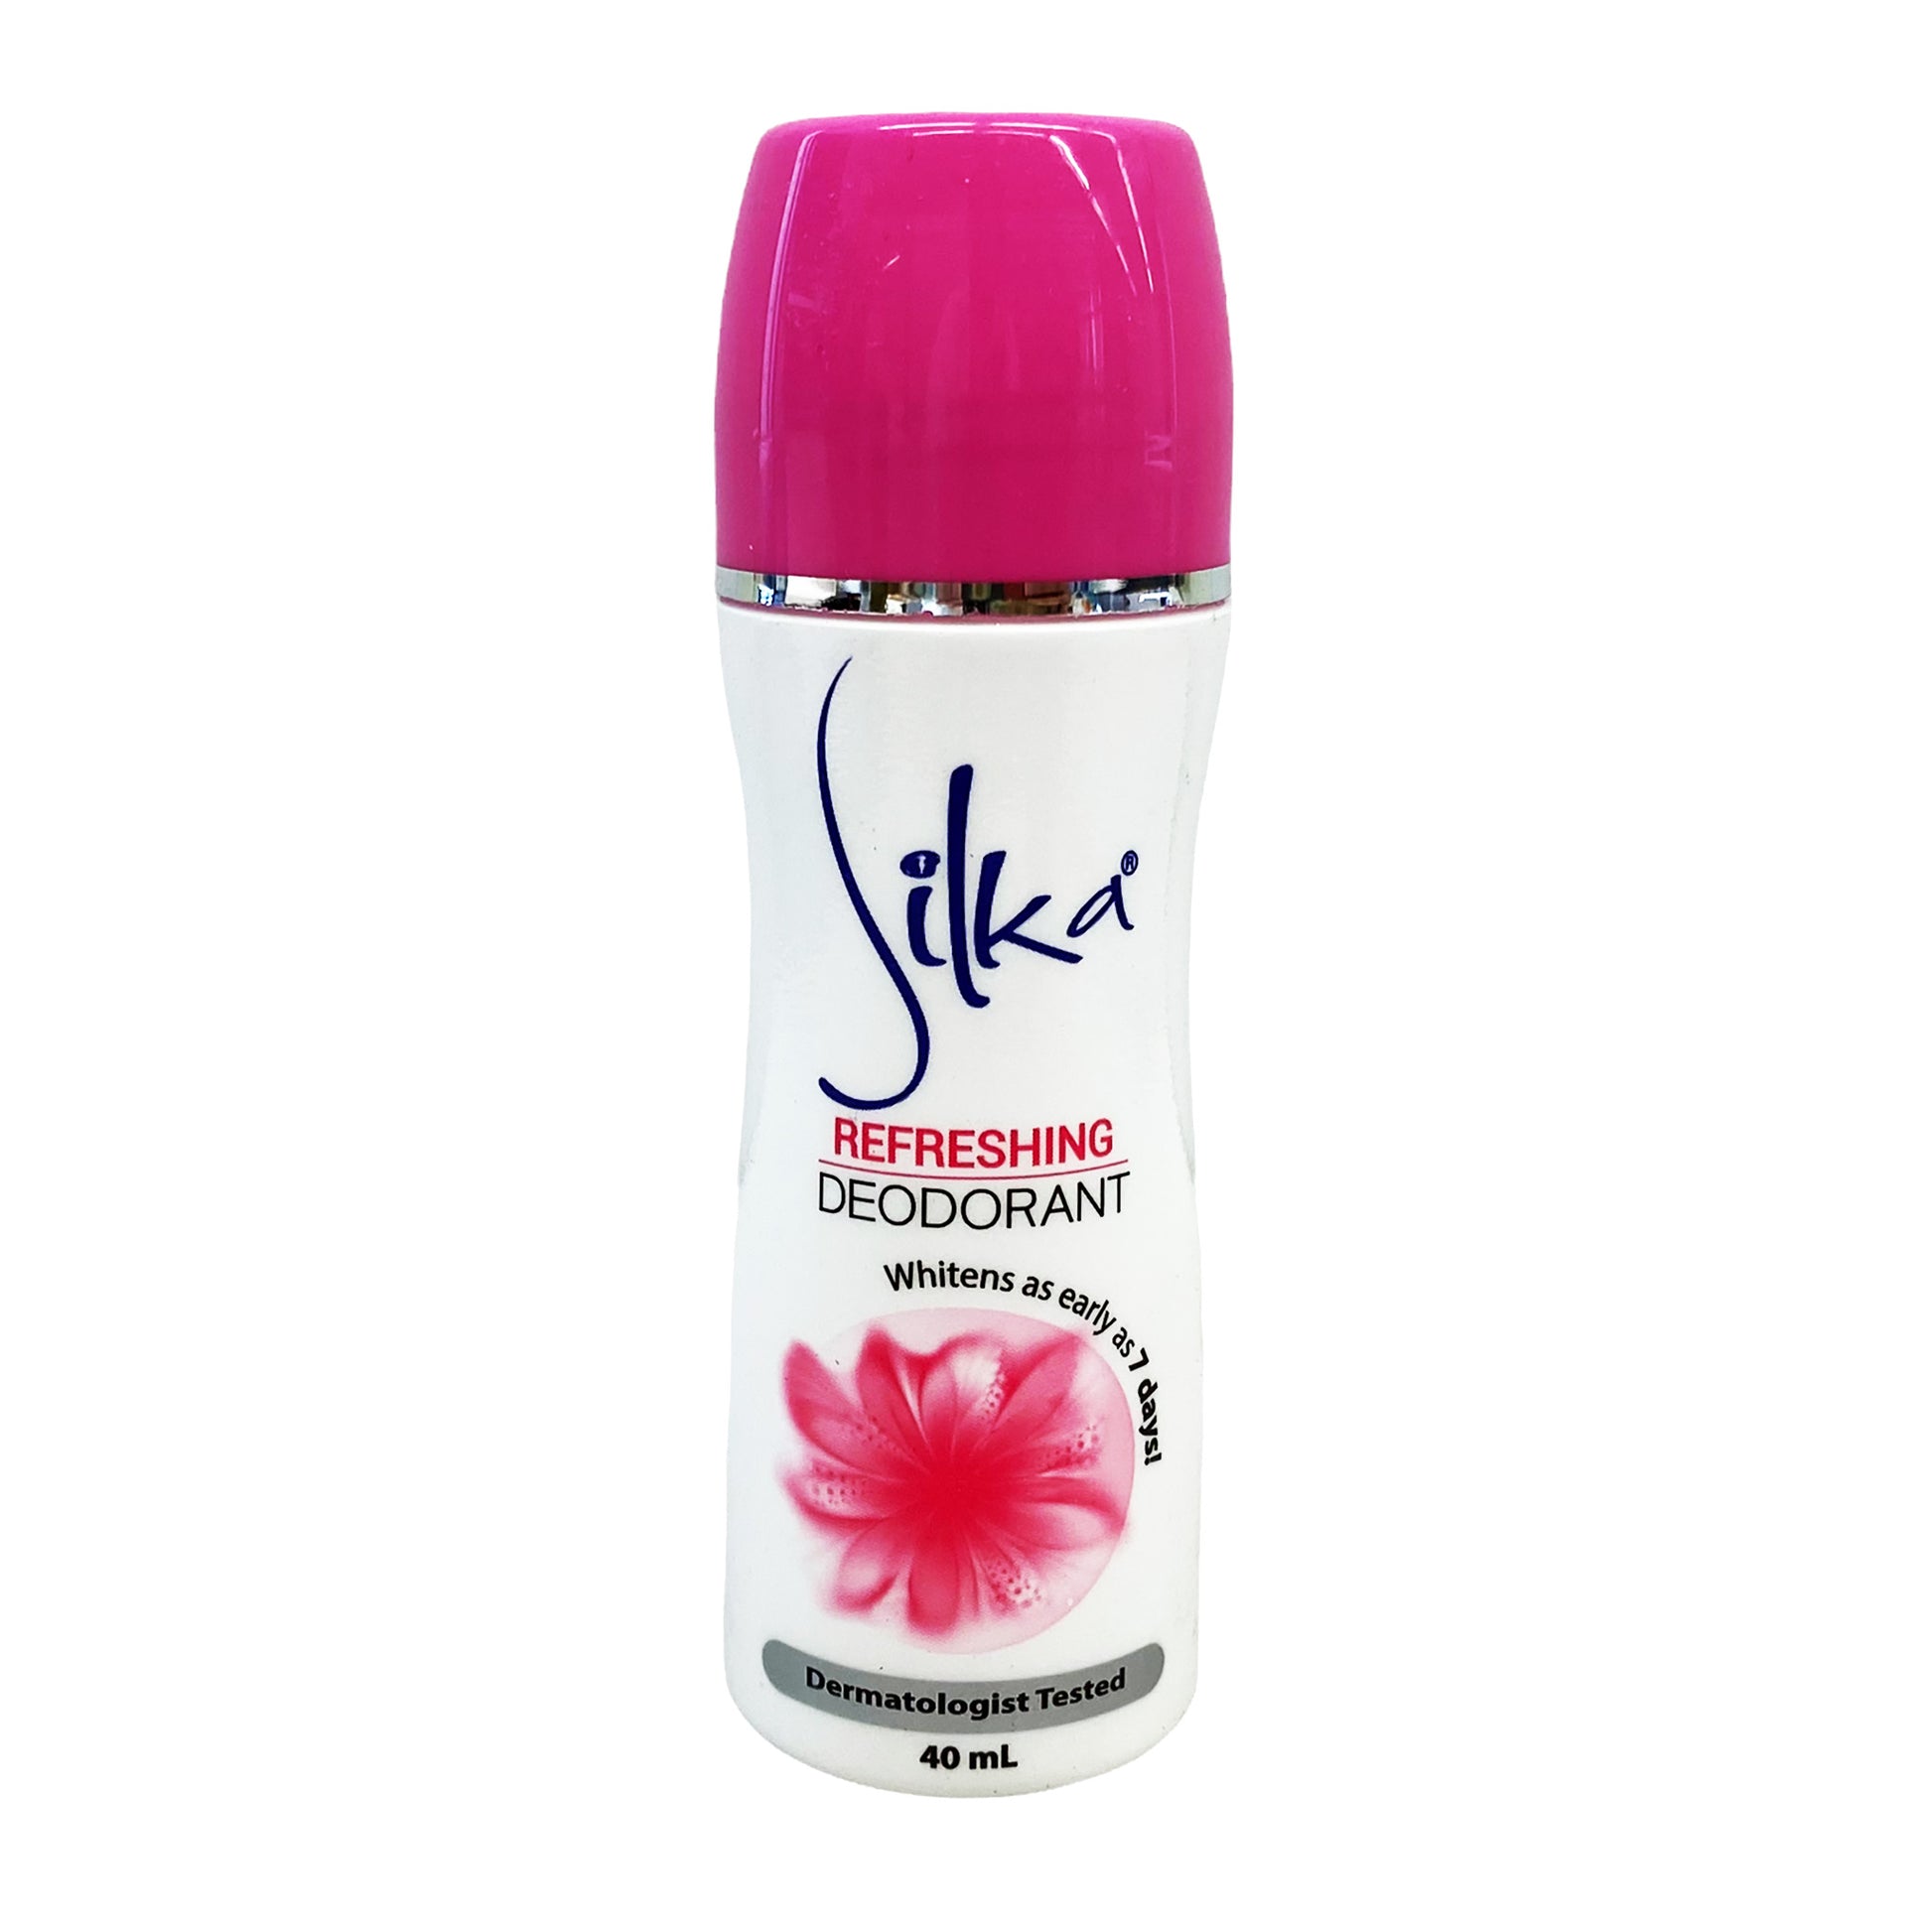 Front graphic view of Silka Deodorant - Refreshing 1.35oz (40ml)